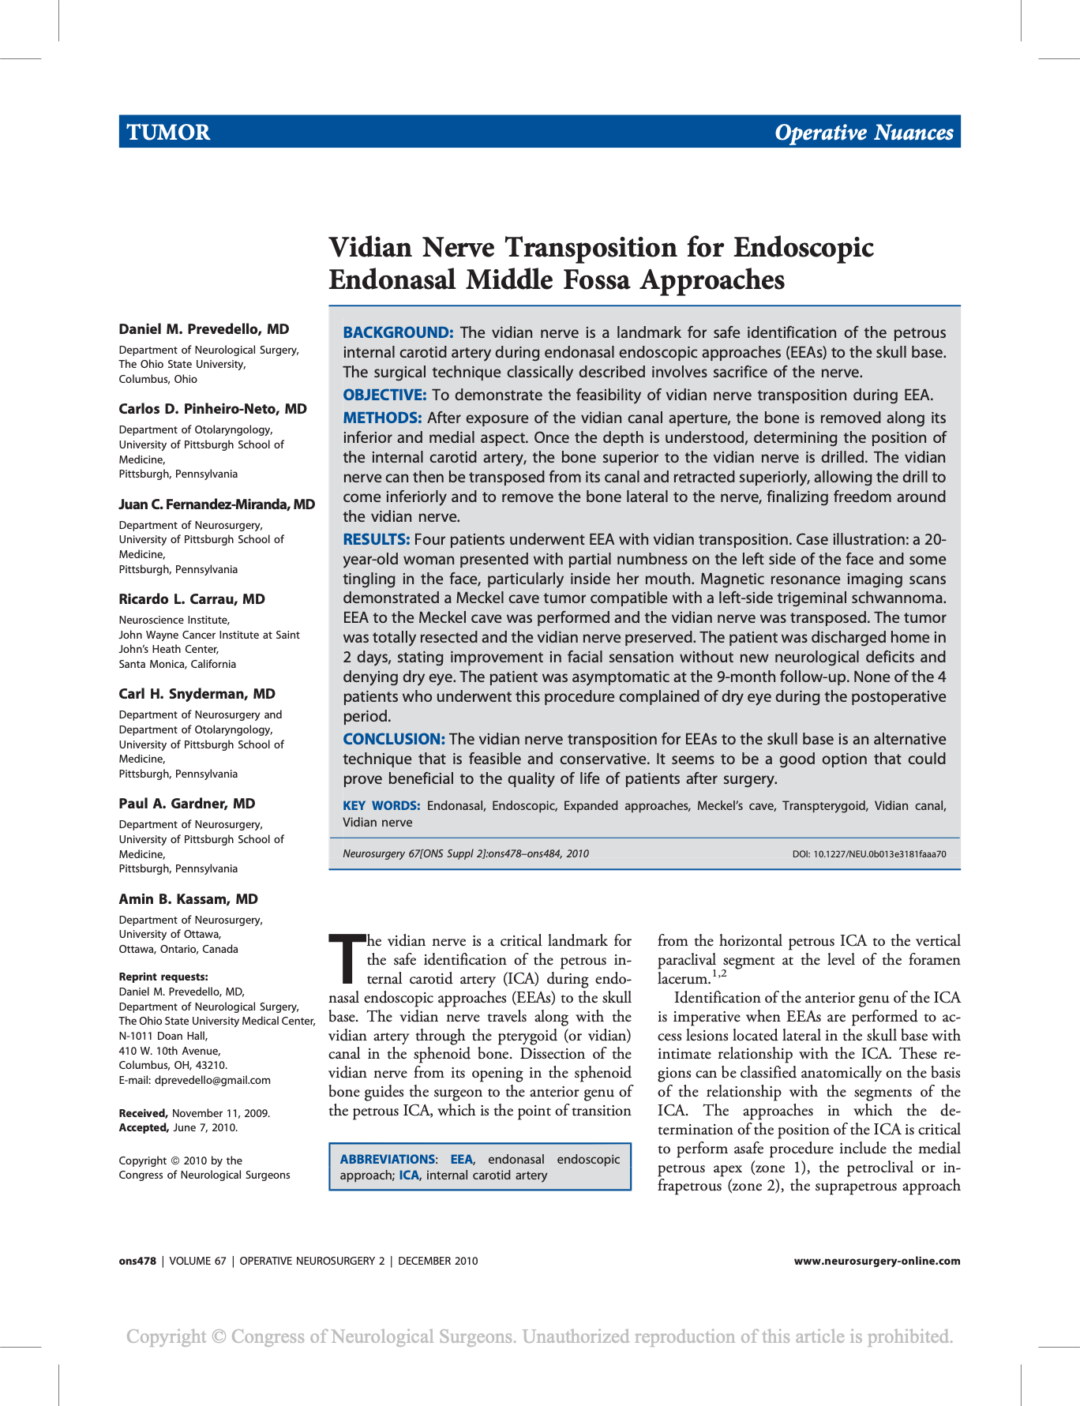 Vidian Nerve Transposition for Endoscopic Endonasal Middle Fossa Approaches